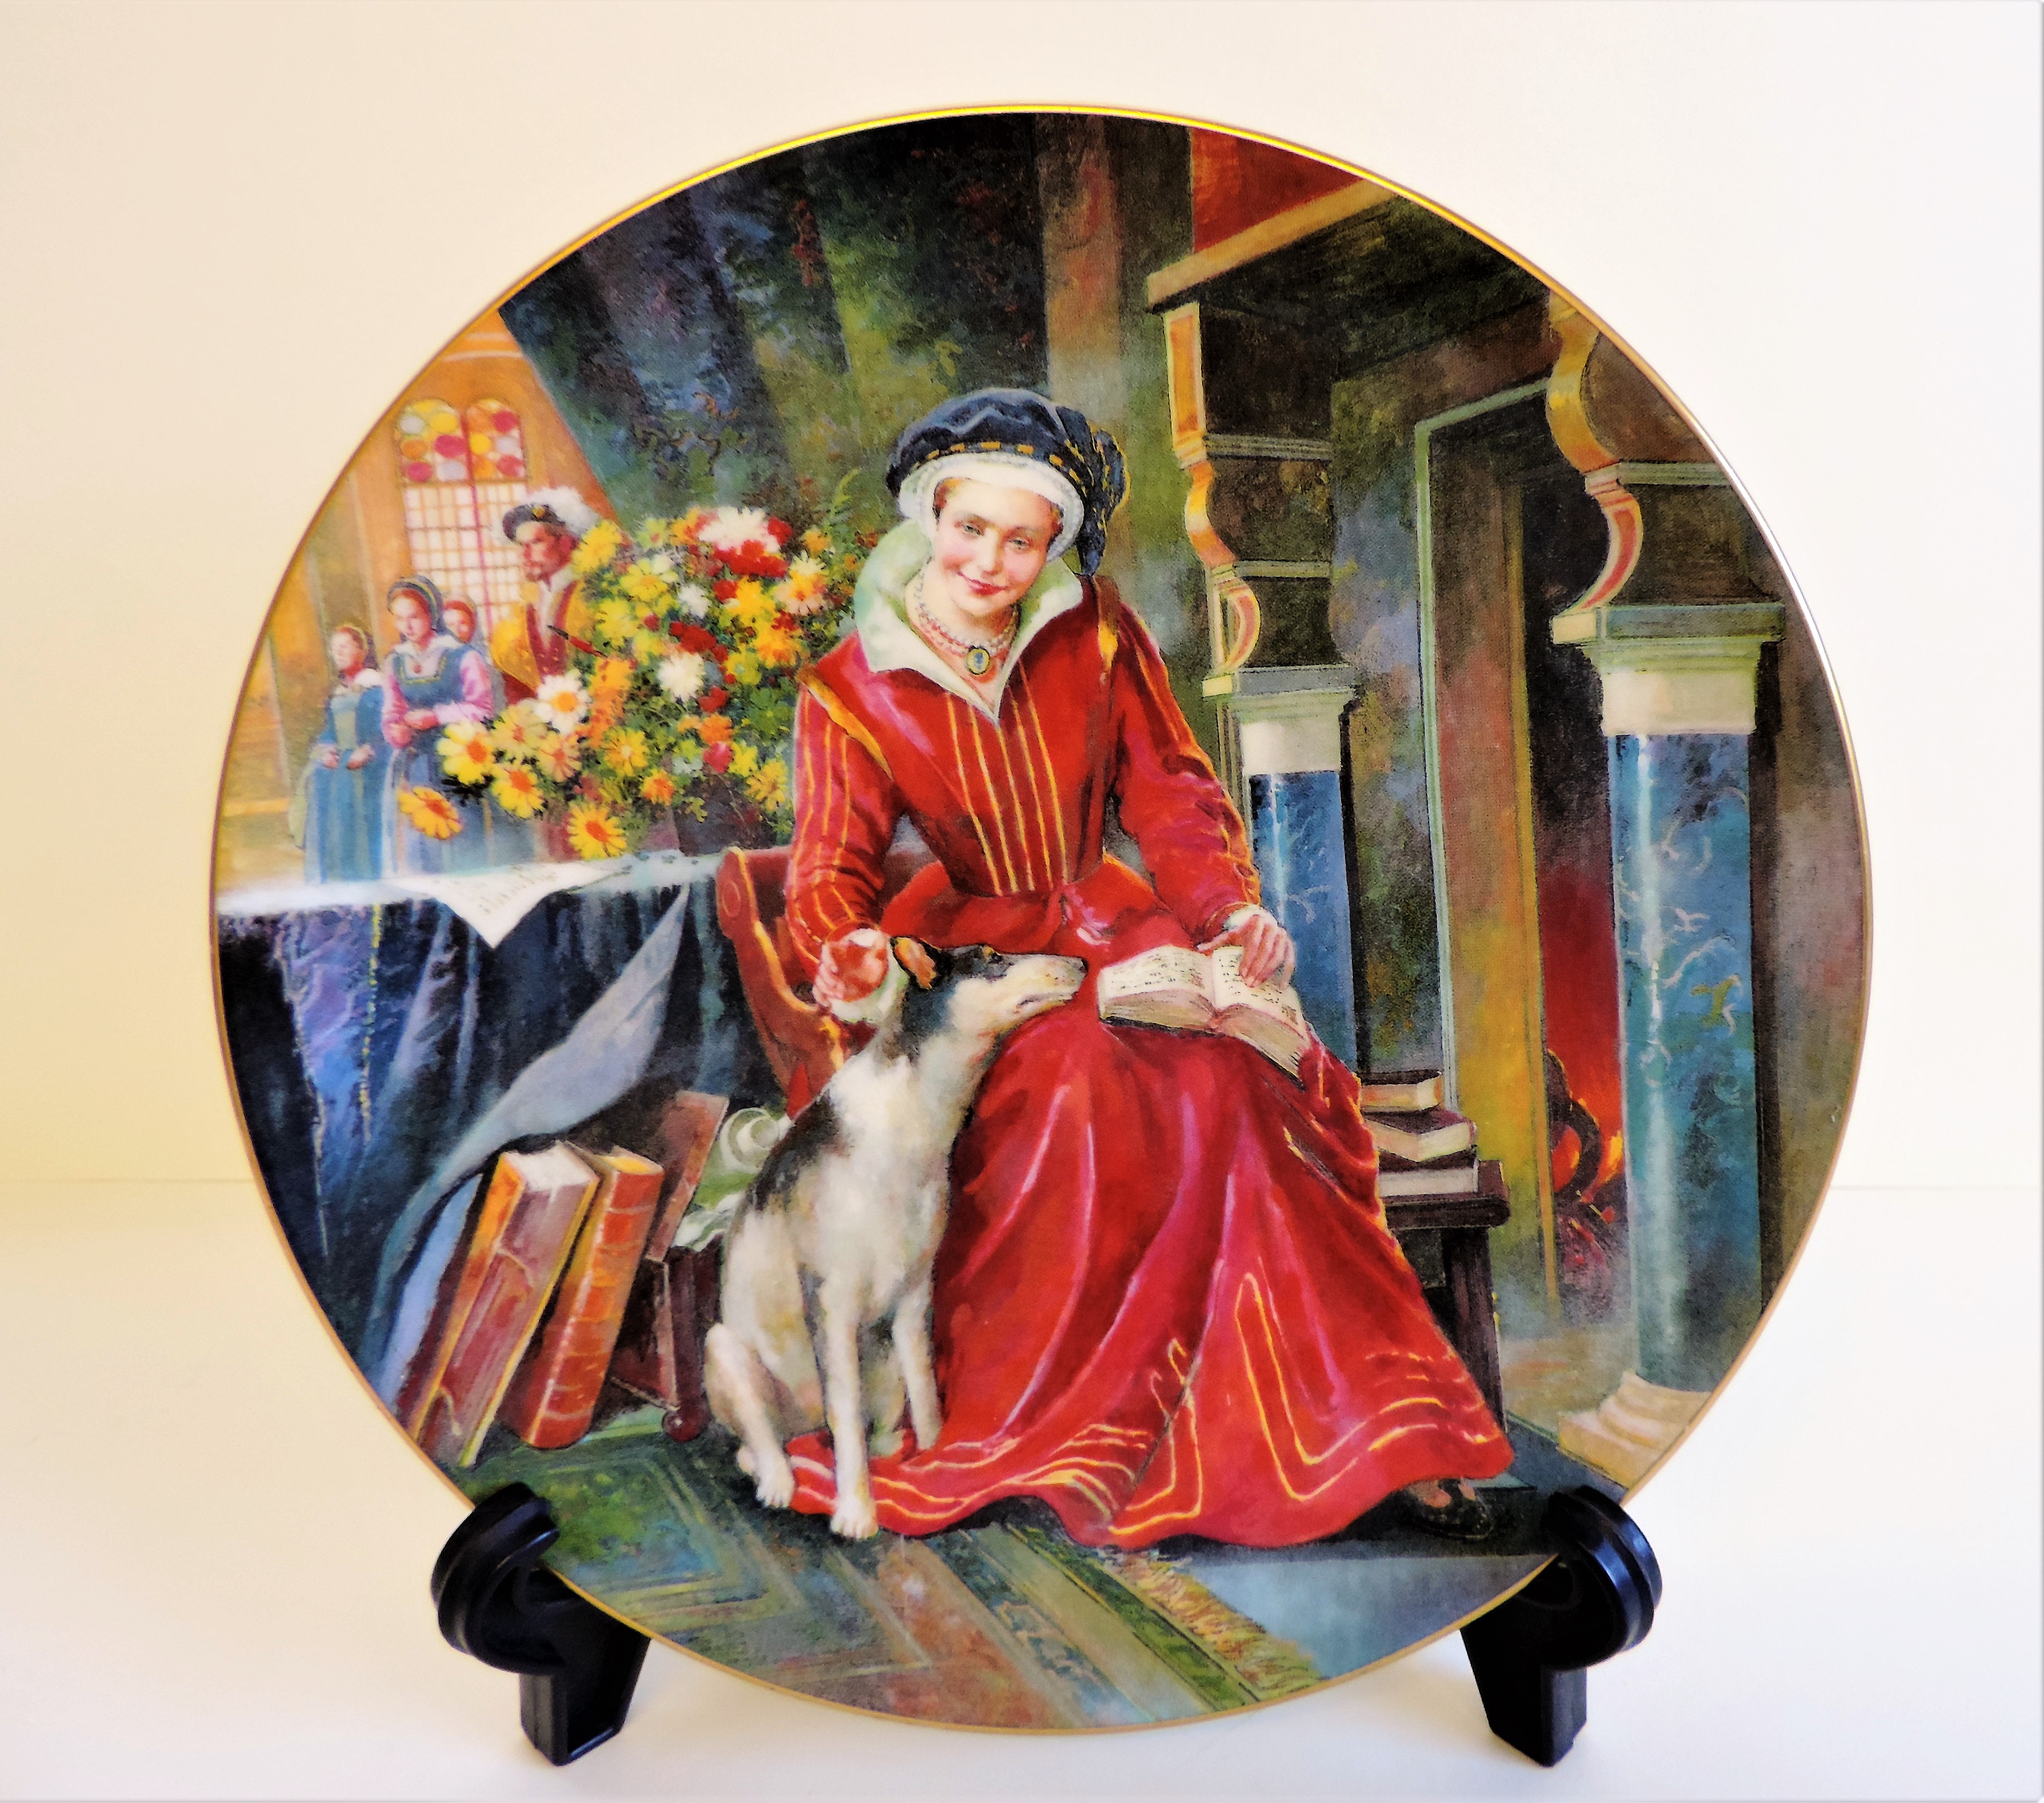 Royal Doulton King Henry VIII Series Catherine Parr' Fine Bone China Plate - Image 2 of 6